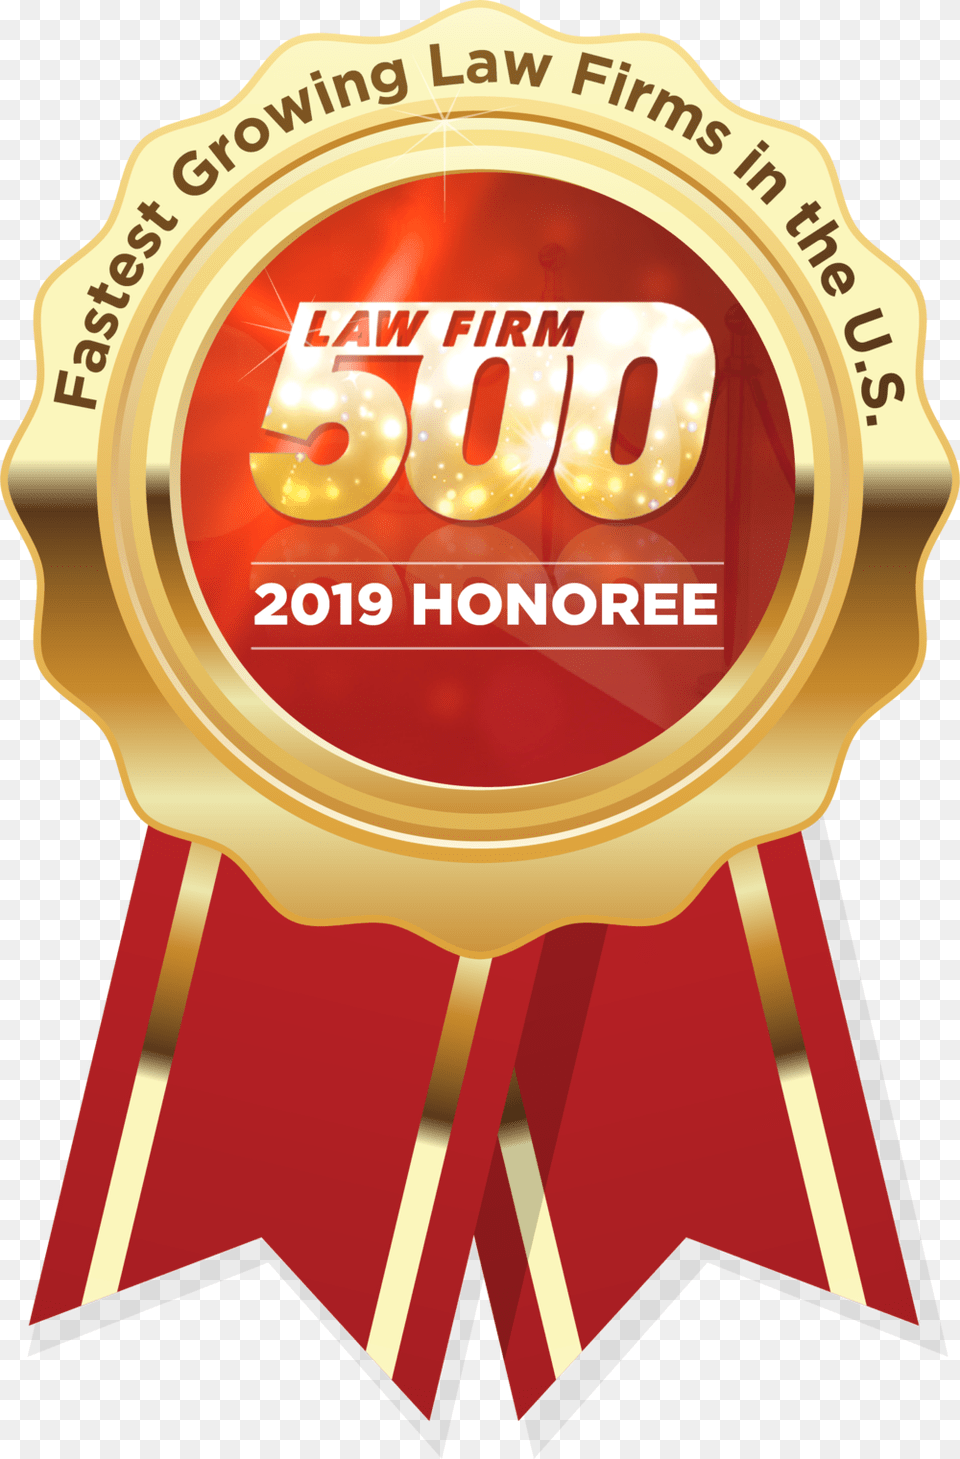 2019 Lf500 Honoree Seal High Res 2019 Law Firm, Gold, Logo, Badge, Symbol Png Image